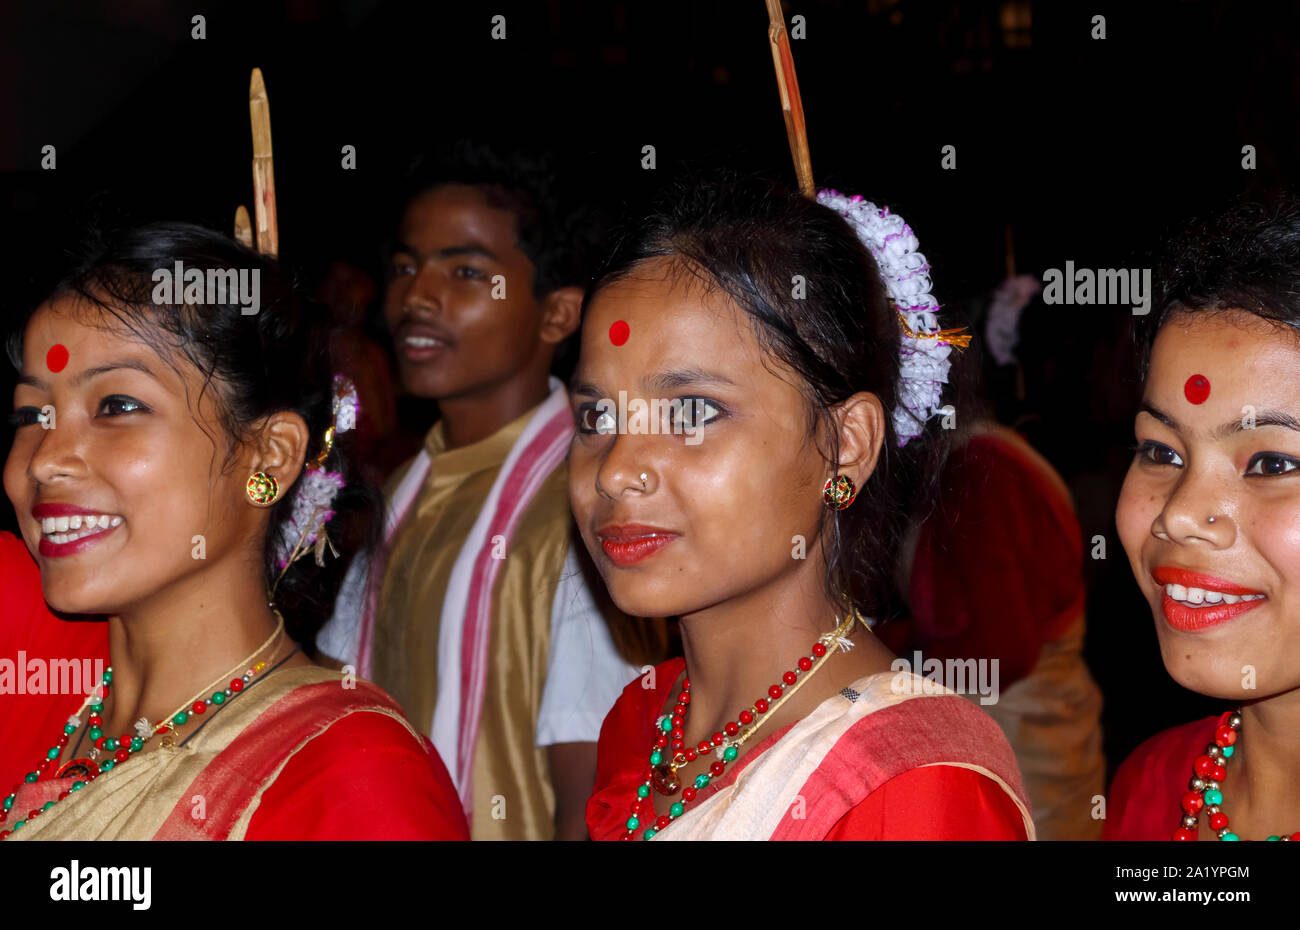 Smiling young local women dancers with bindis on their forehead at an Indian New Year dance in Kaziranga, Golaghat District, Bochagaon, Assam, India Stock Photo